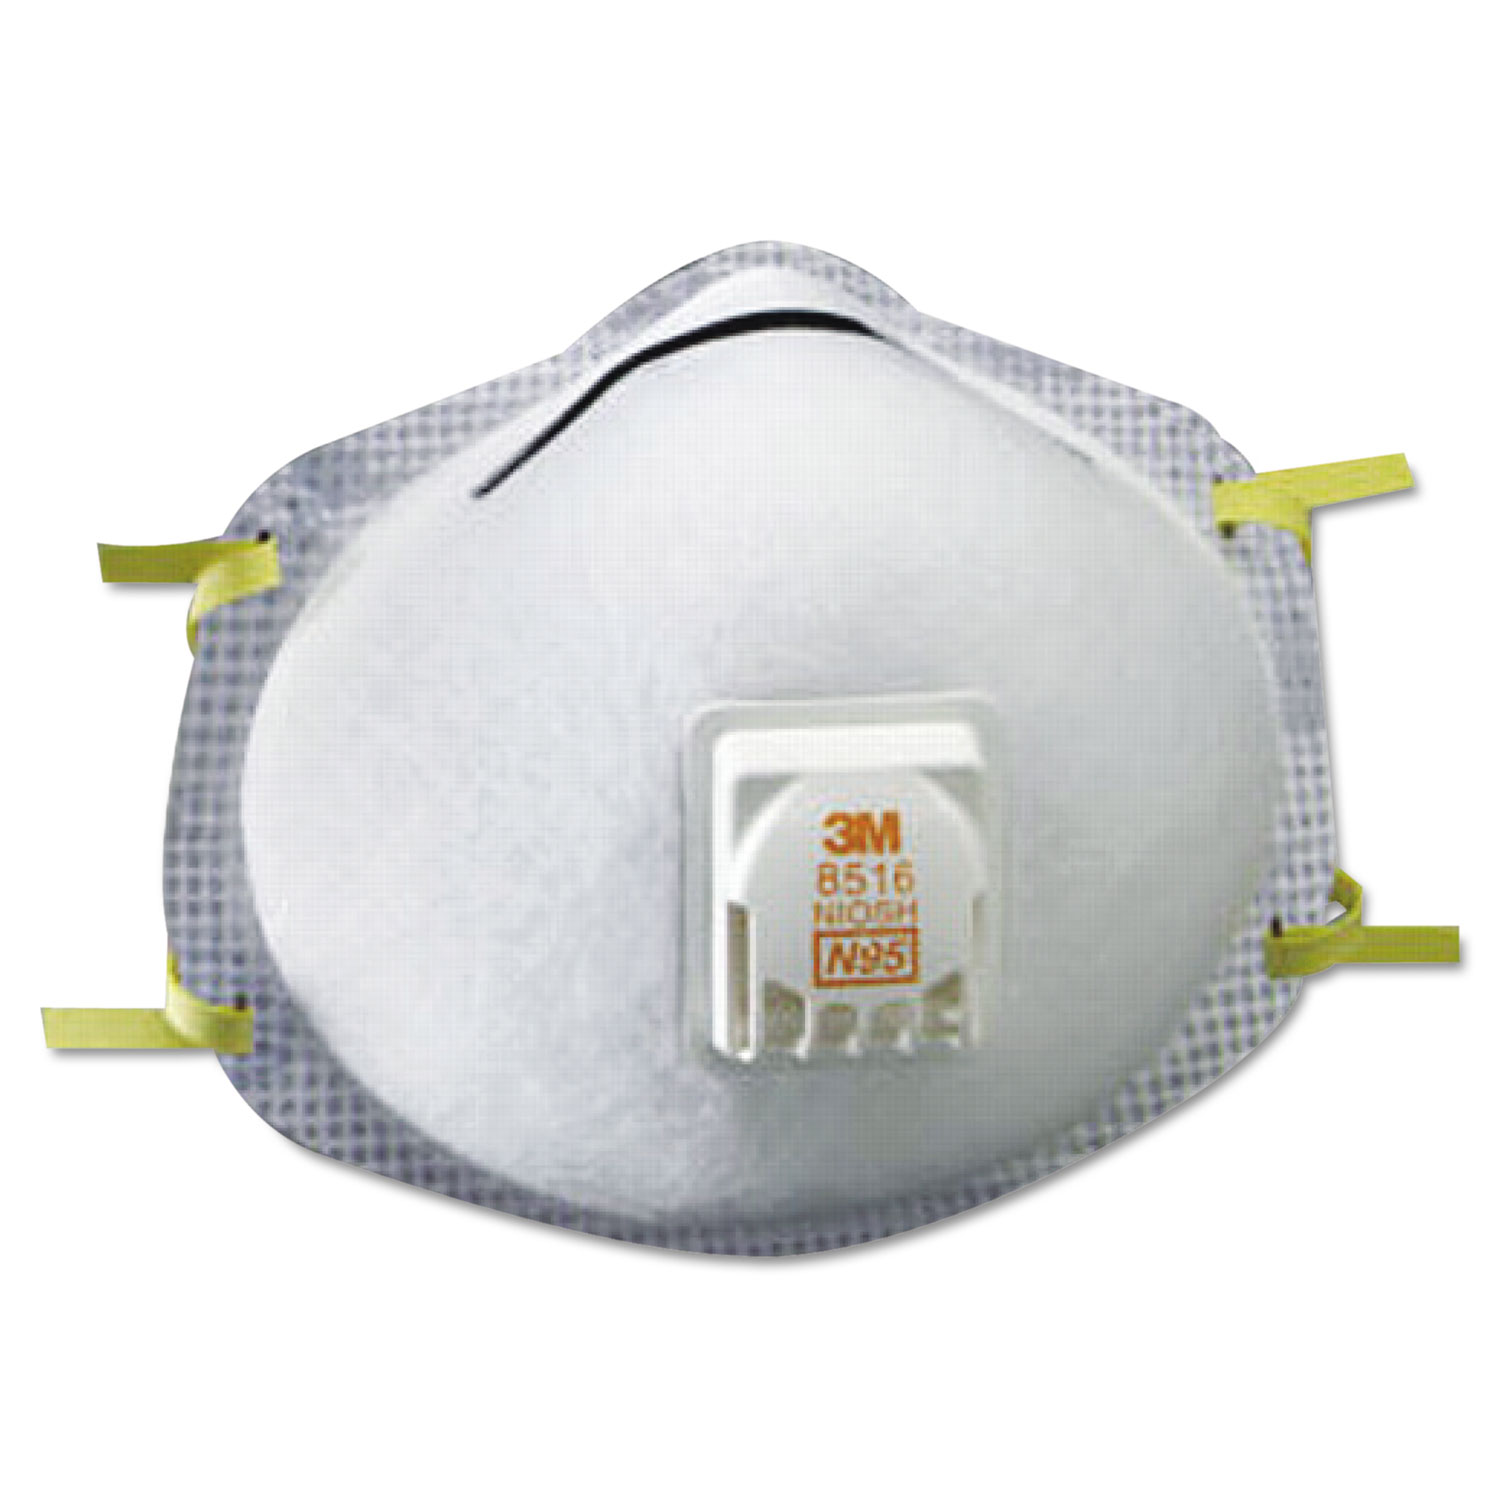 N95 Particulate Respirator, Nuisance Level Acid-Gas Relief